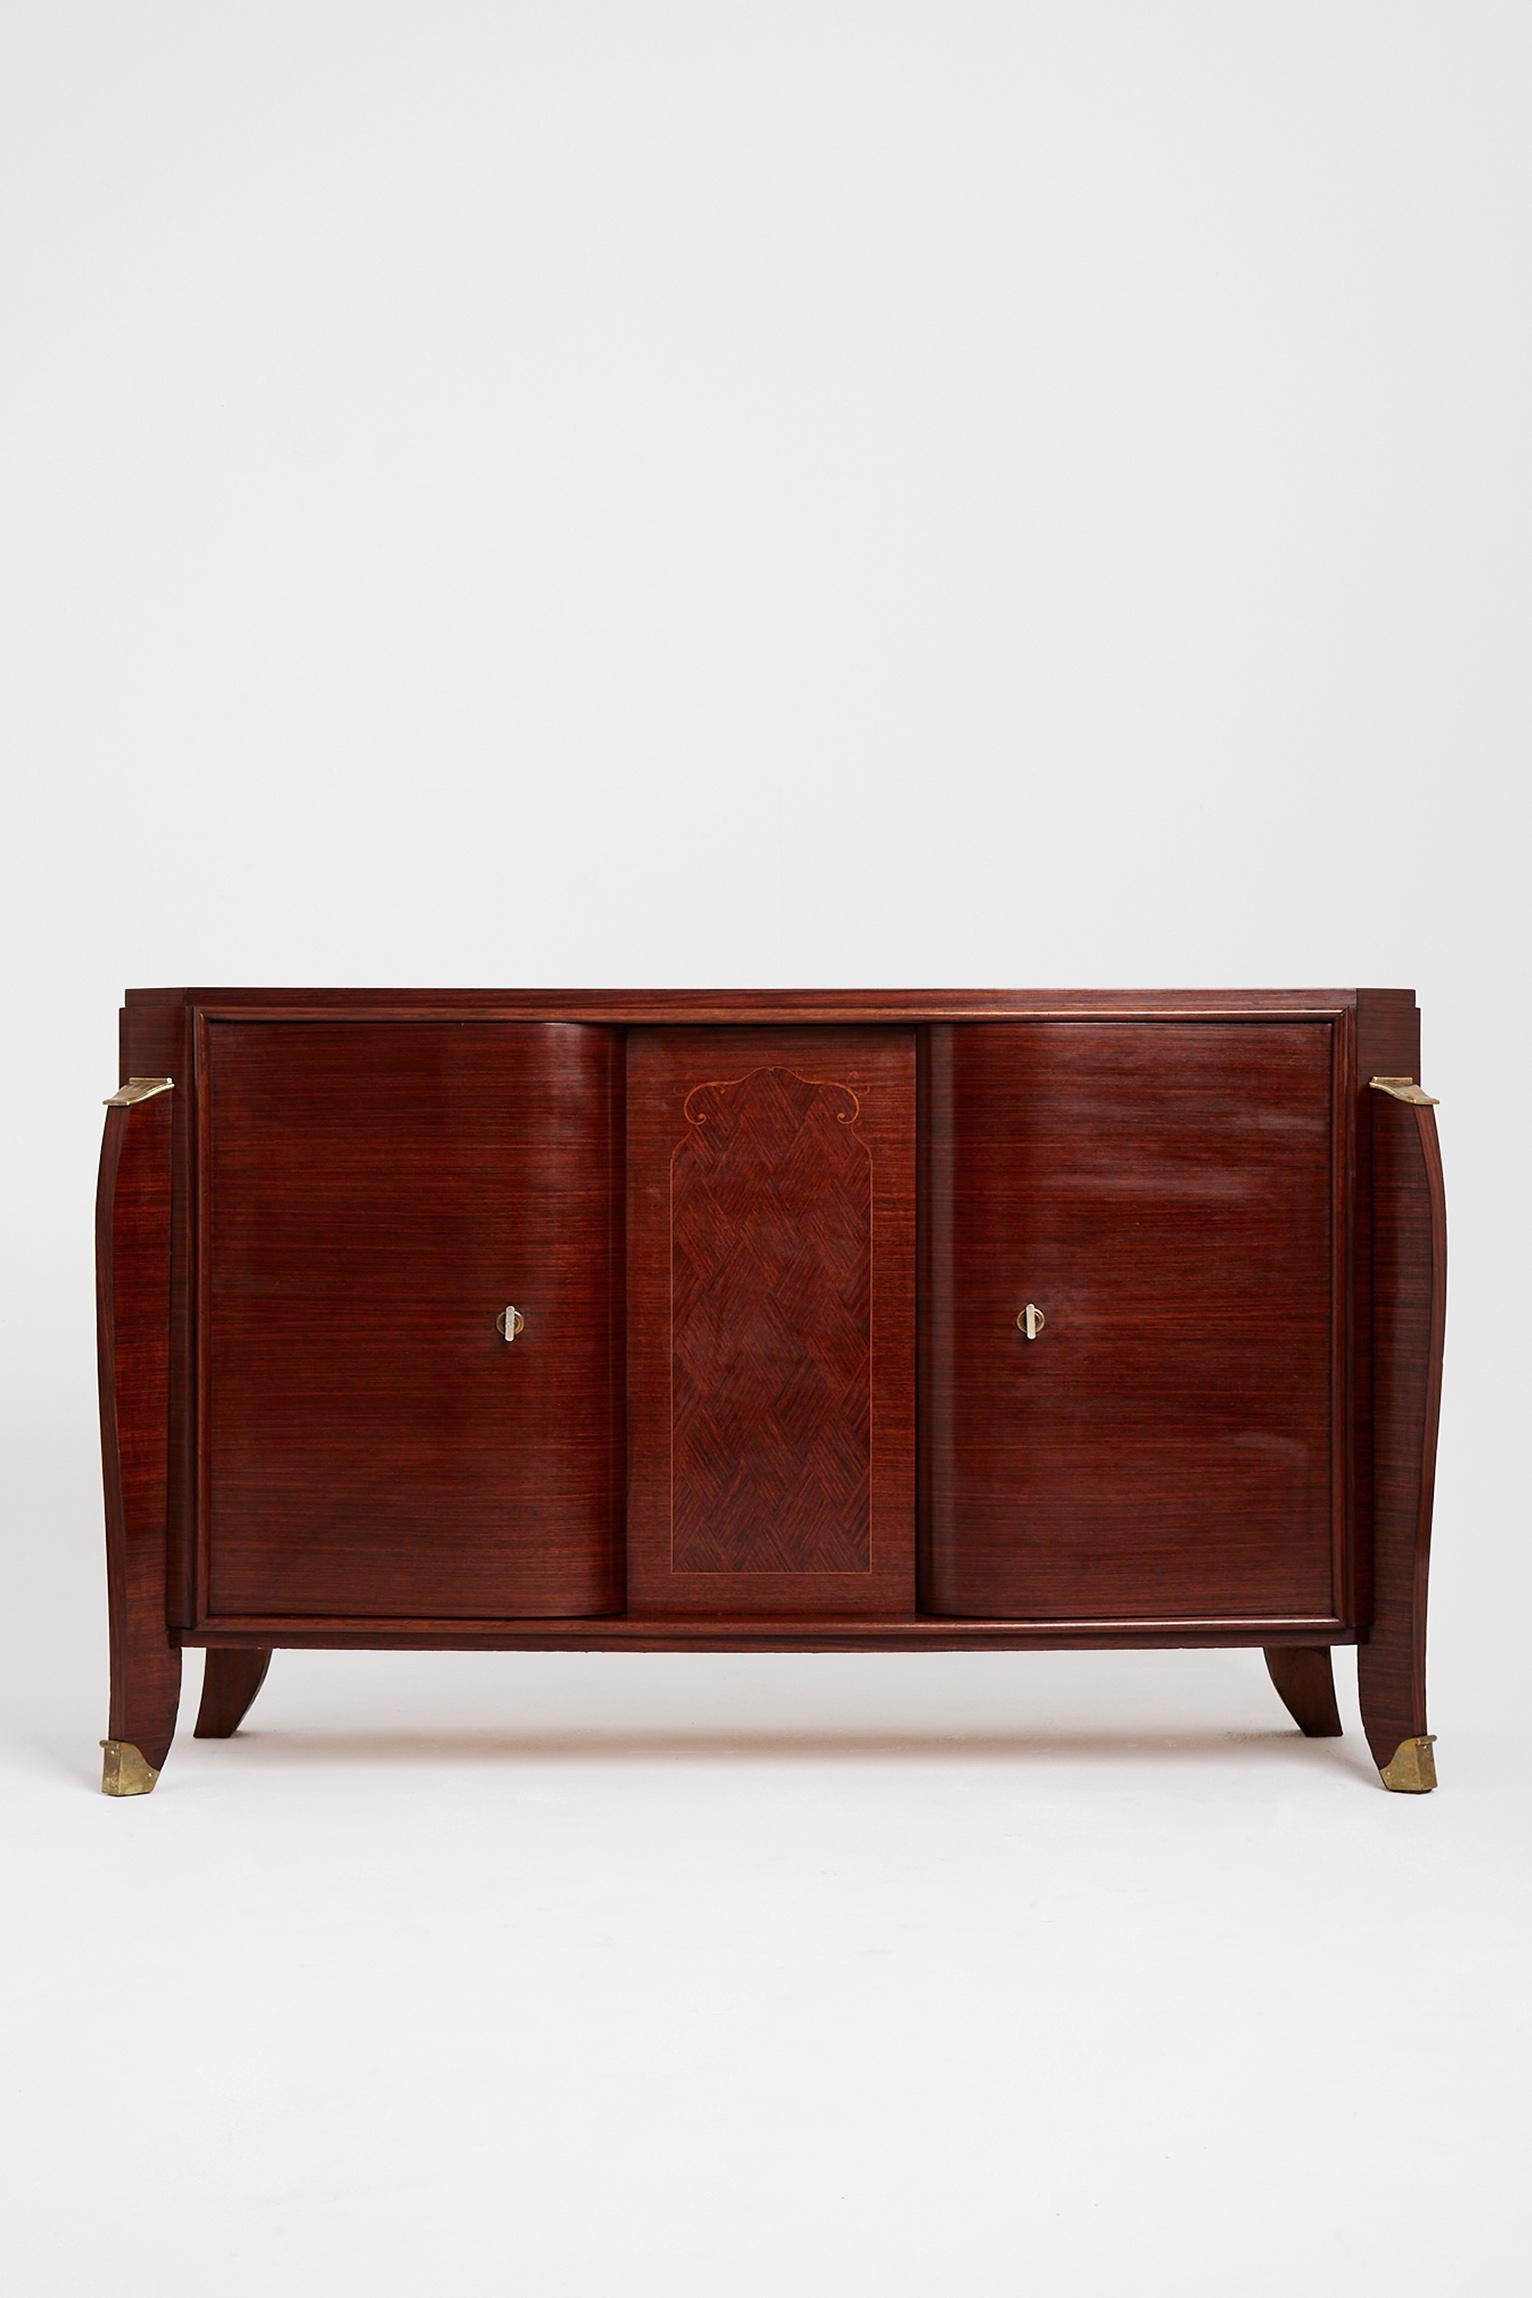 An Art Deco mahogany sideboard by Jules Leleu (1883-1961), the two curved doors centered by a diamond patterned marquetry, on sabre legs with bronze mounts, internally veneered in sycamore, with two adjustable shelves.
France, circa 1935.